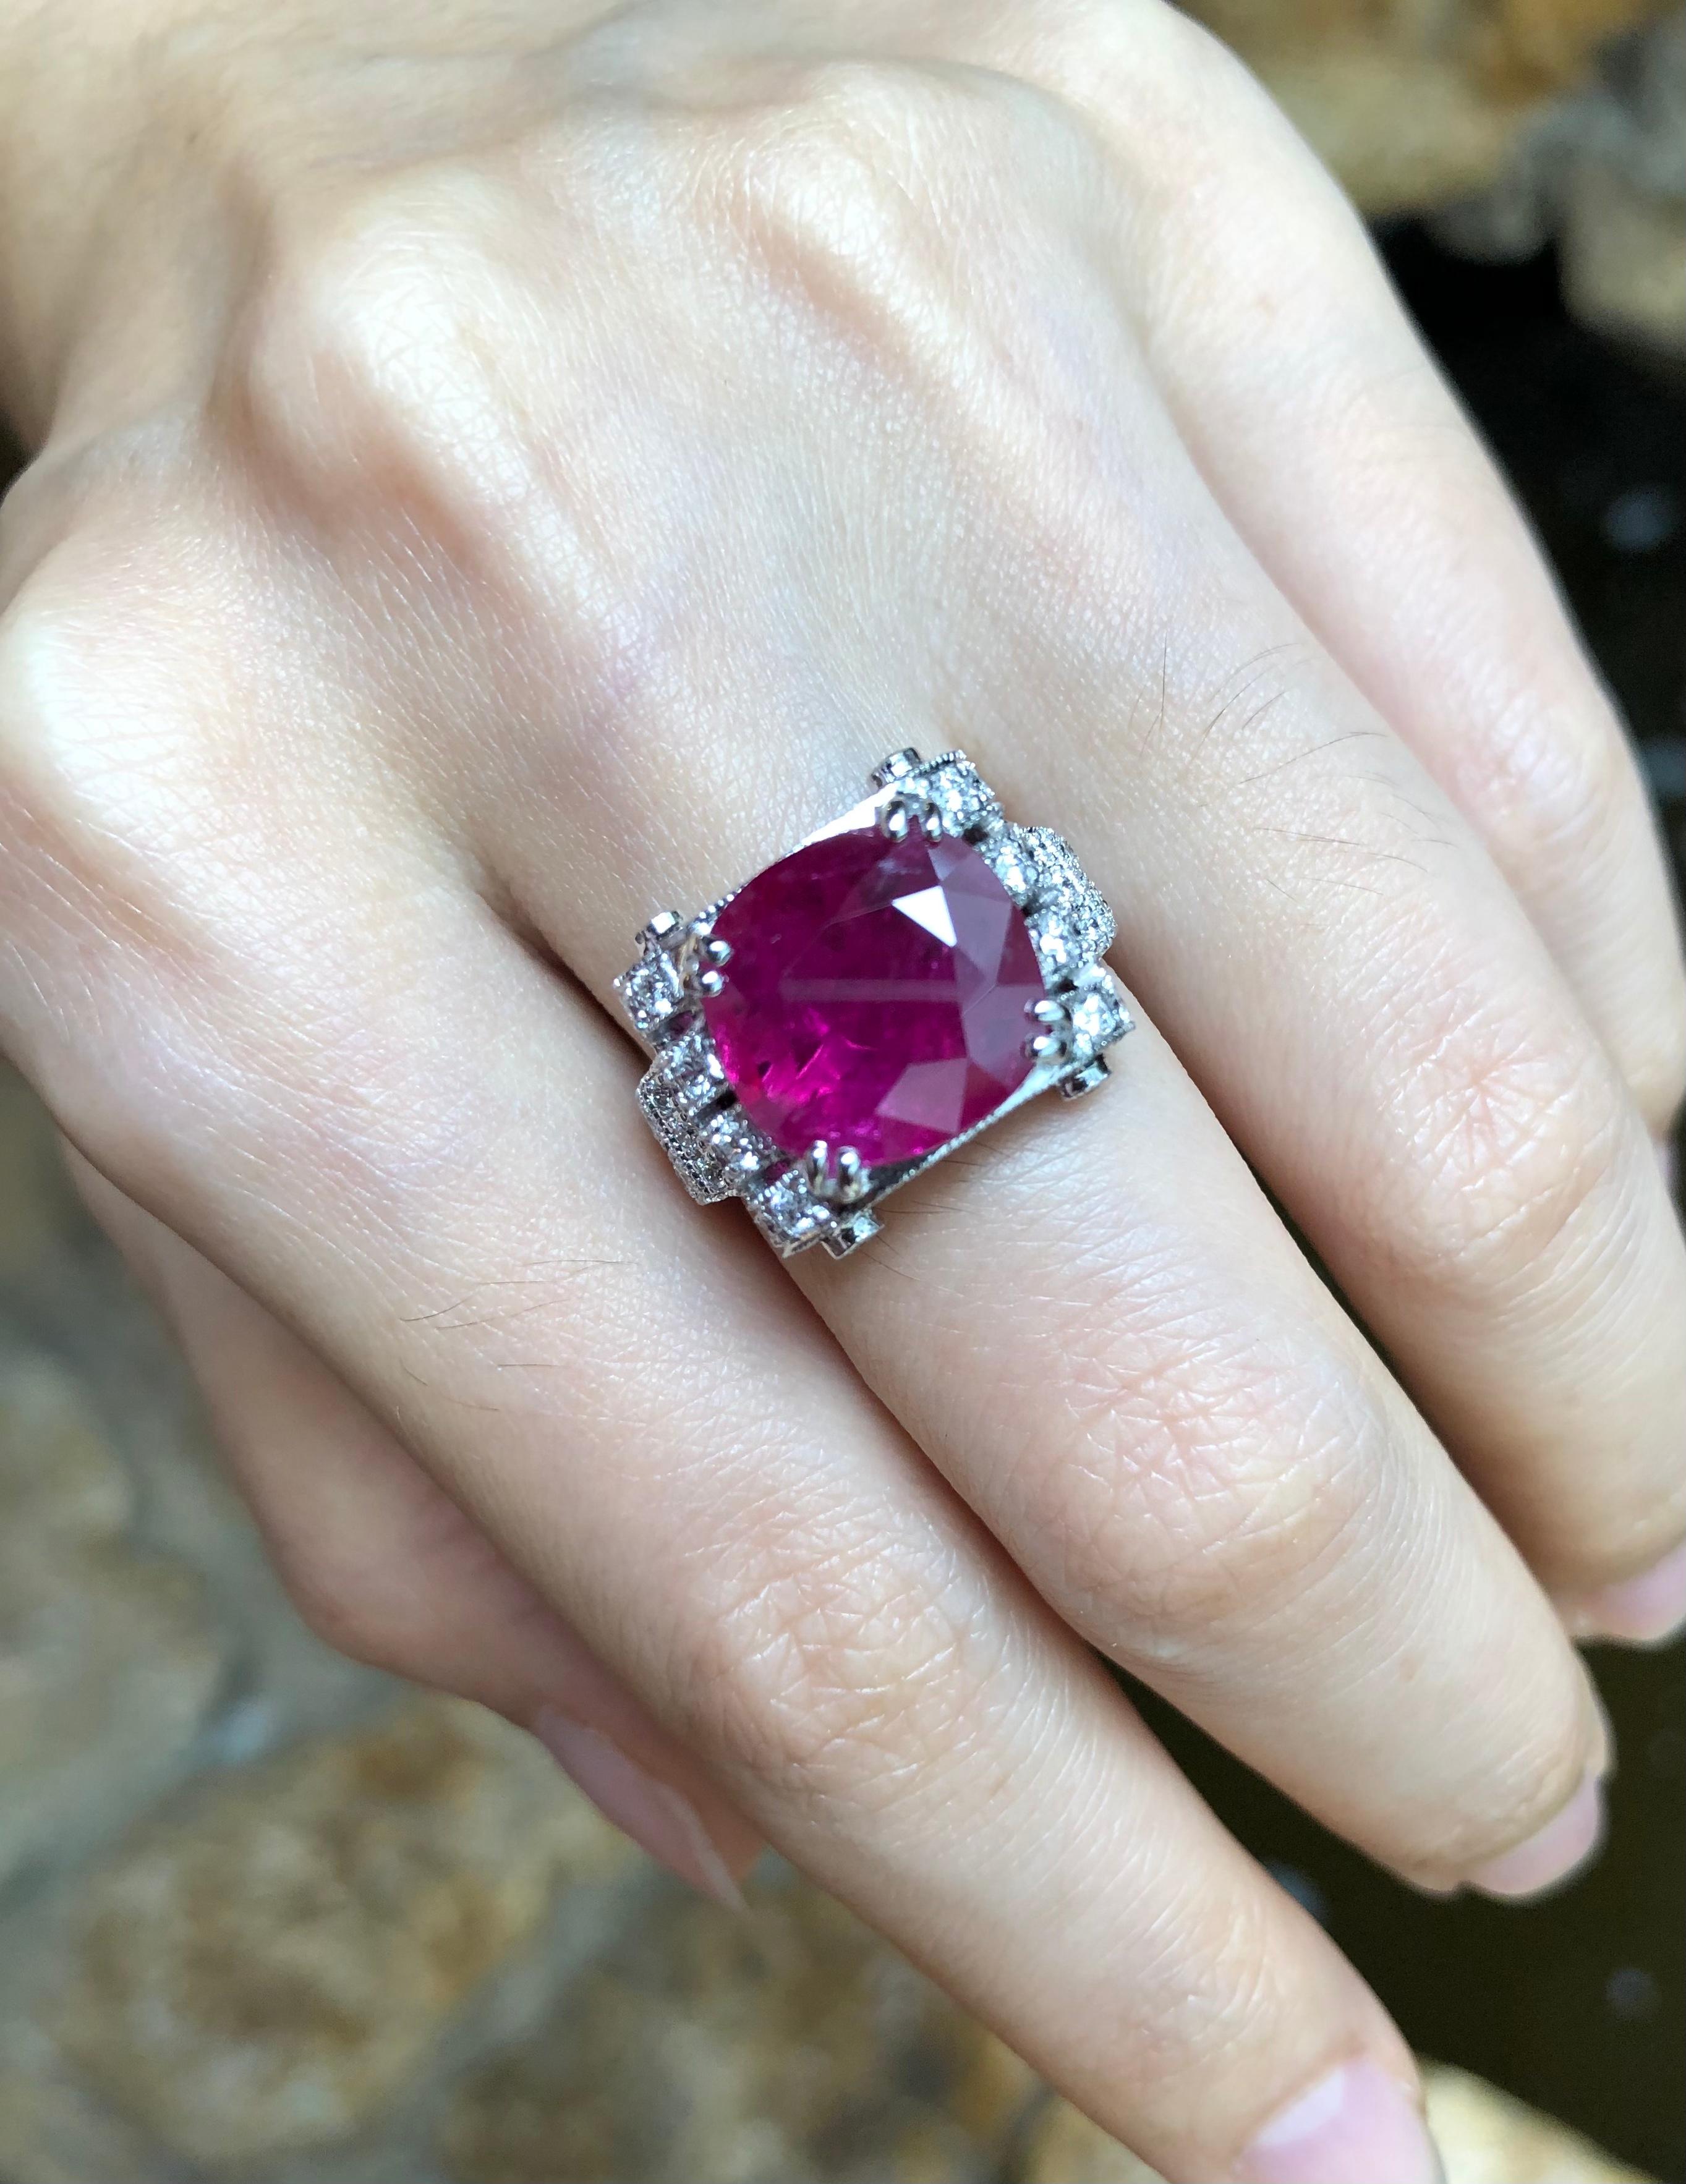 Ruby 4.88 carats with Diamond 0.95 carat Ring set in 18 Karat White Gold Settings

Width:  1.6 cm 
Length: 1.5 cm
Ring Size: 53
Total Weight: 8.83 grams

